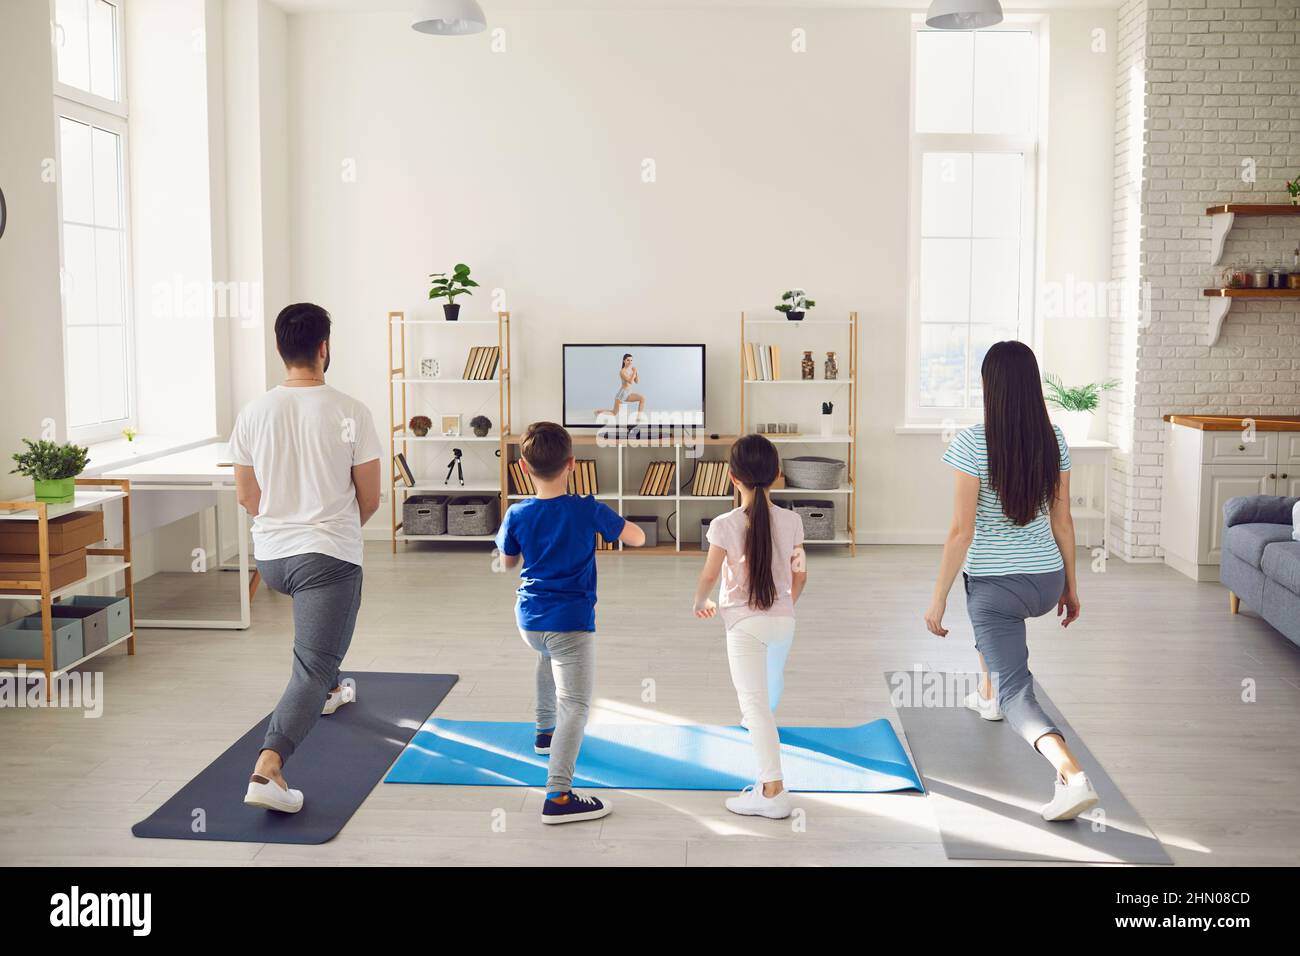 Family watching video workout on television and doing stretching exercise together Stock Photo